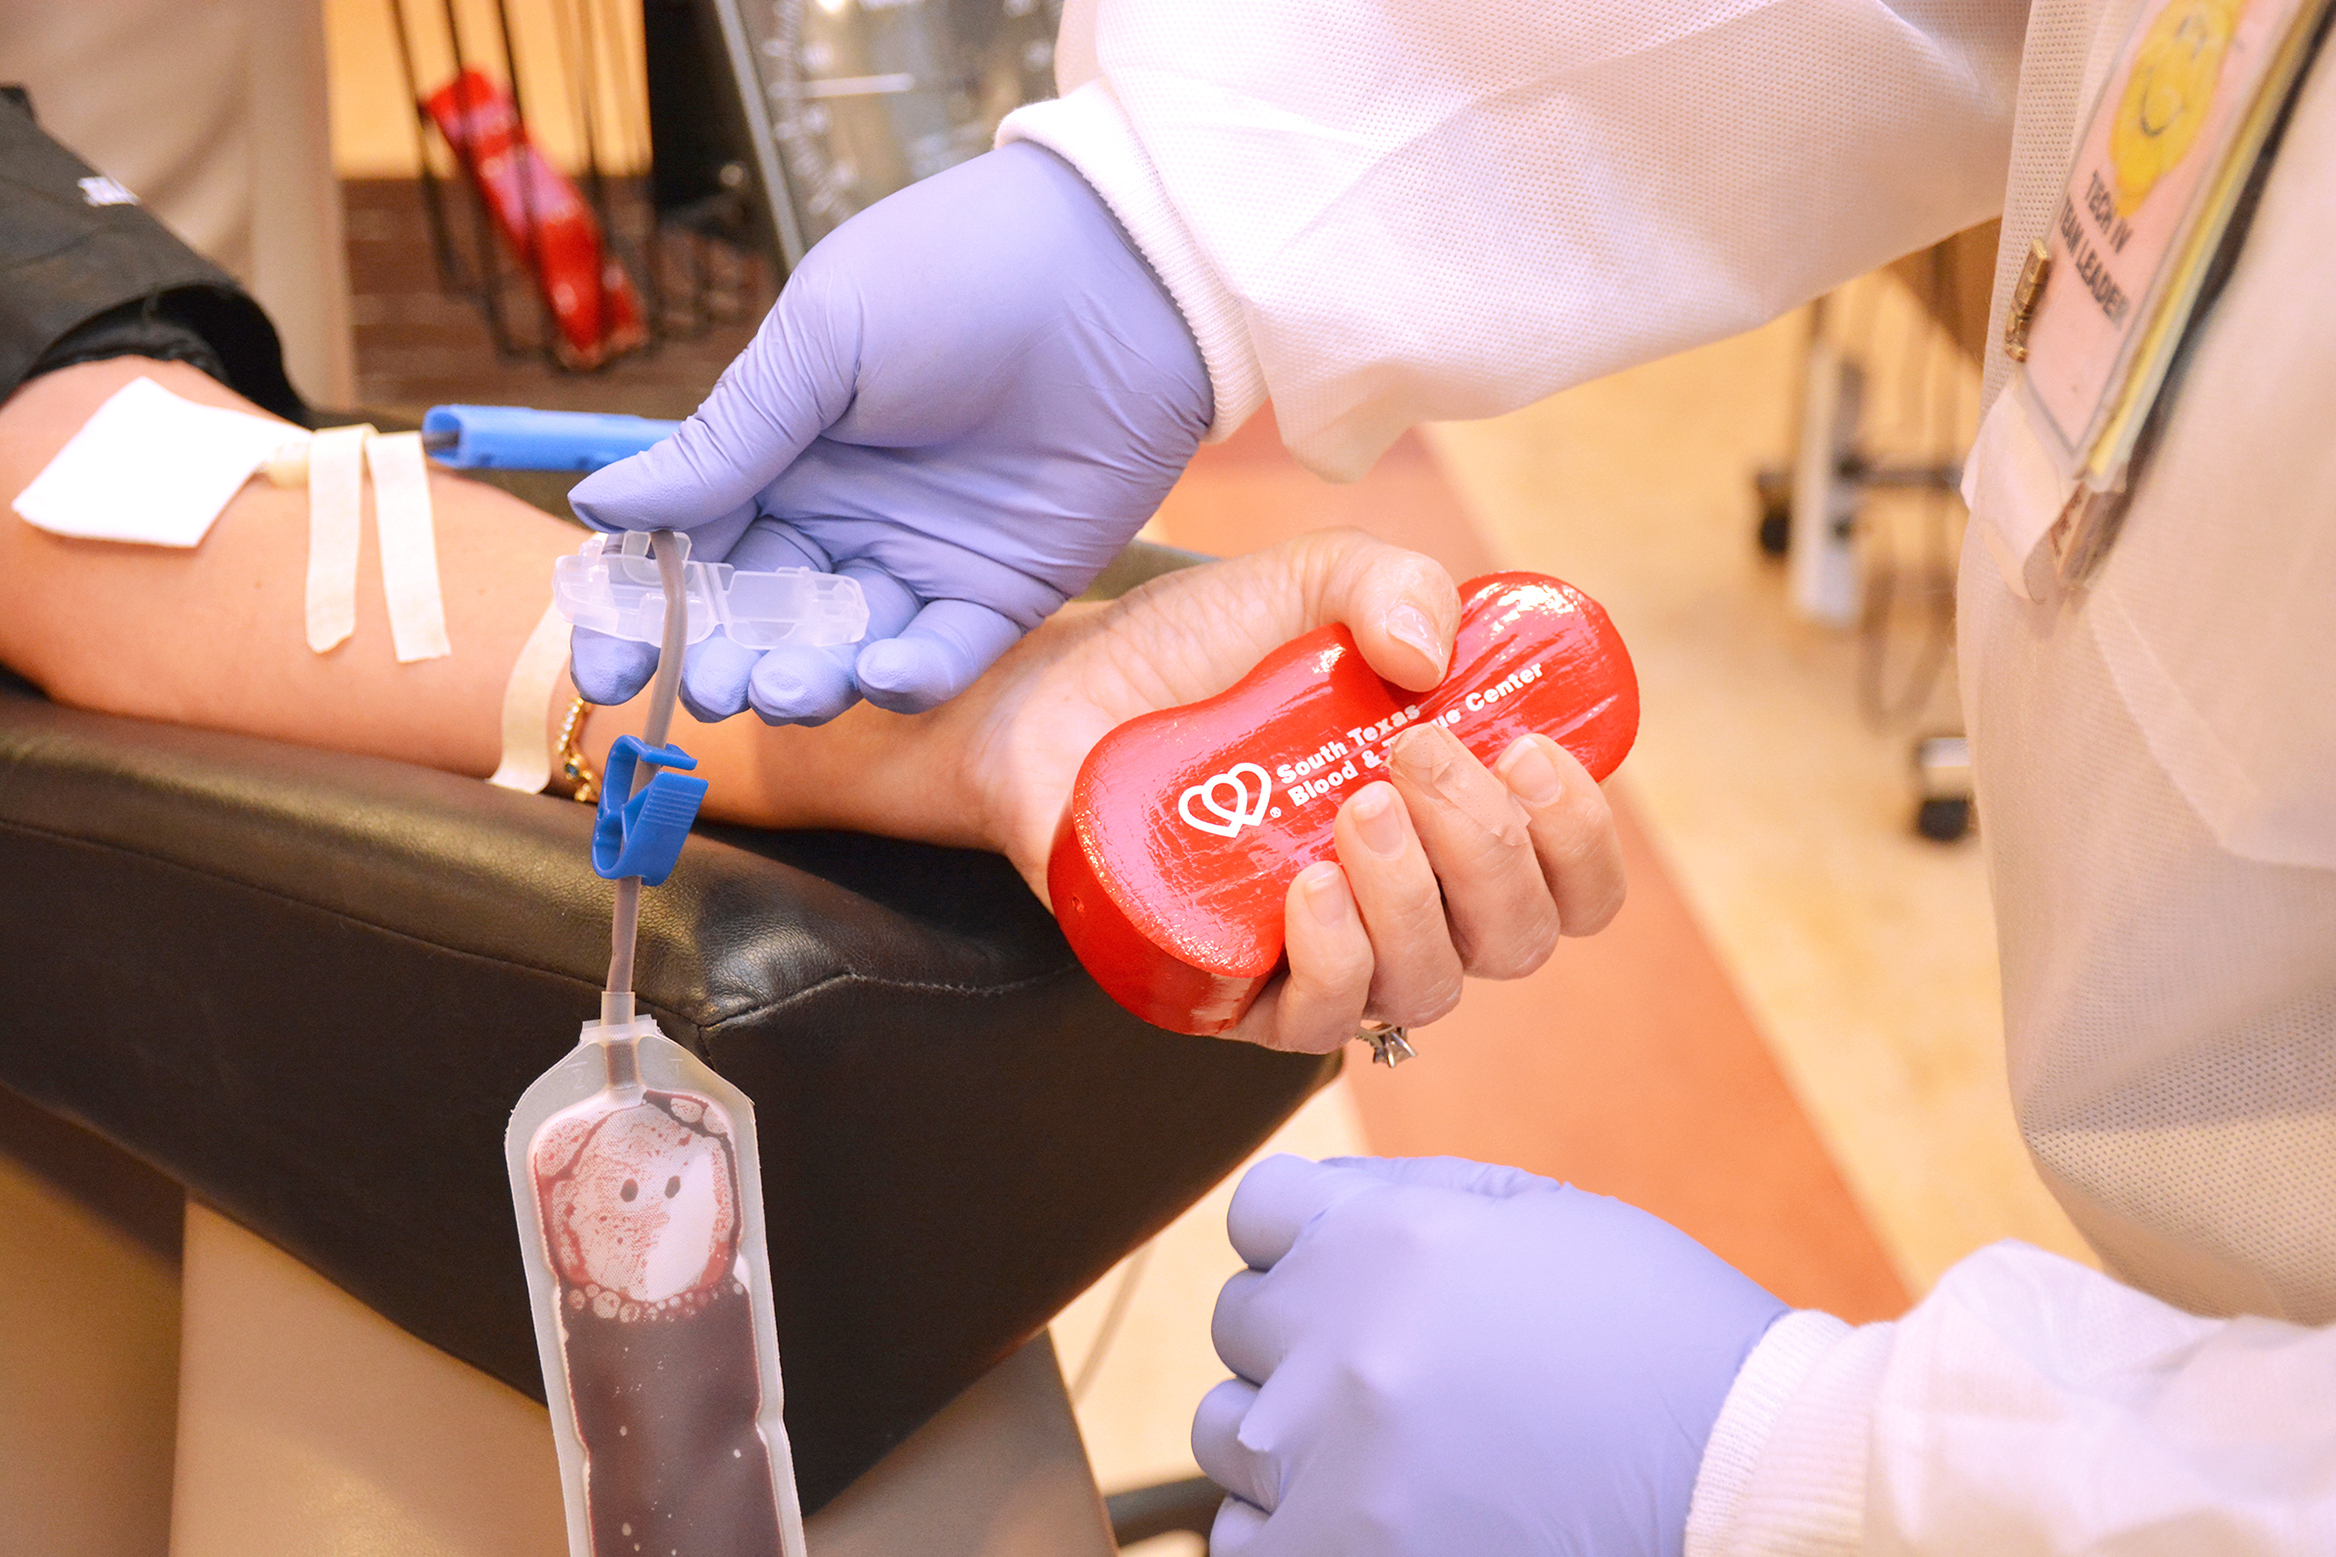 South Texas Blood & Tissue Implements New FDA Guidance for Assessing Blood Donor Eligibility